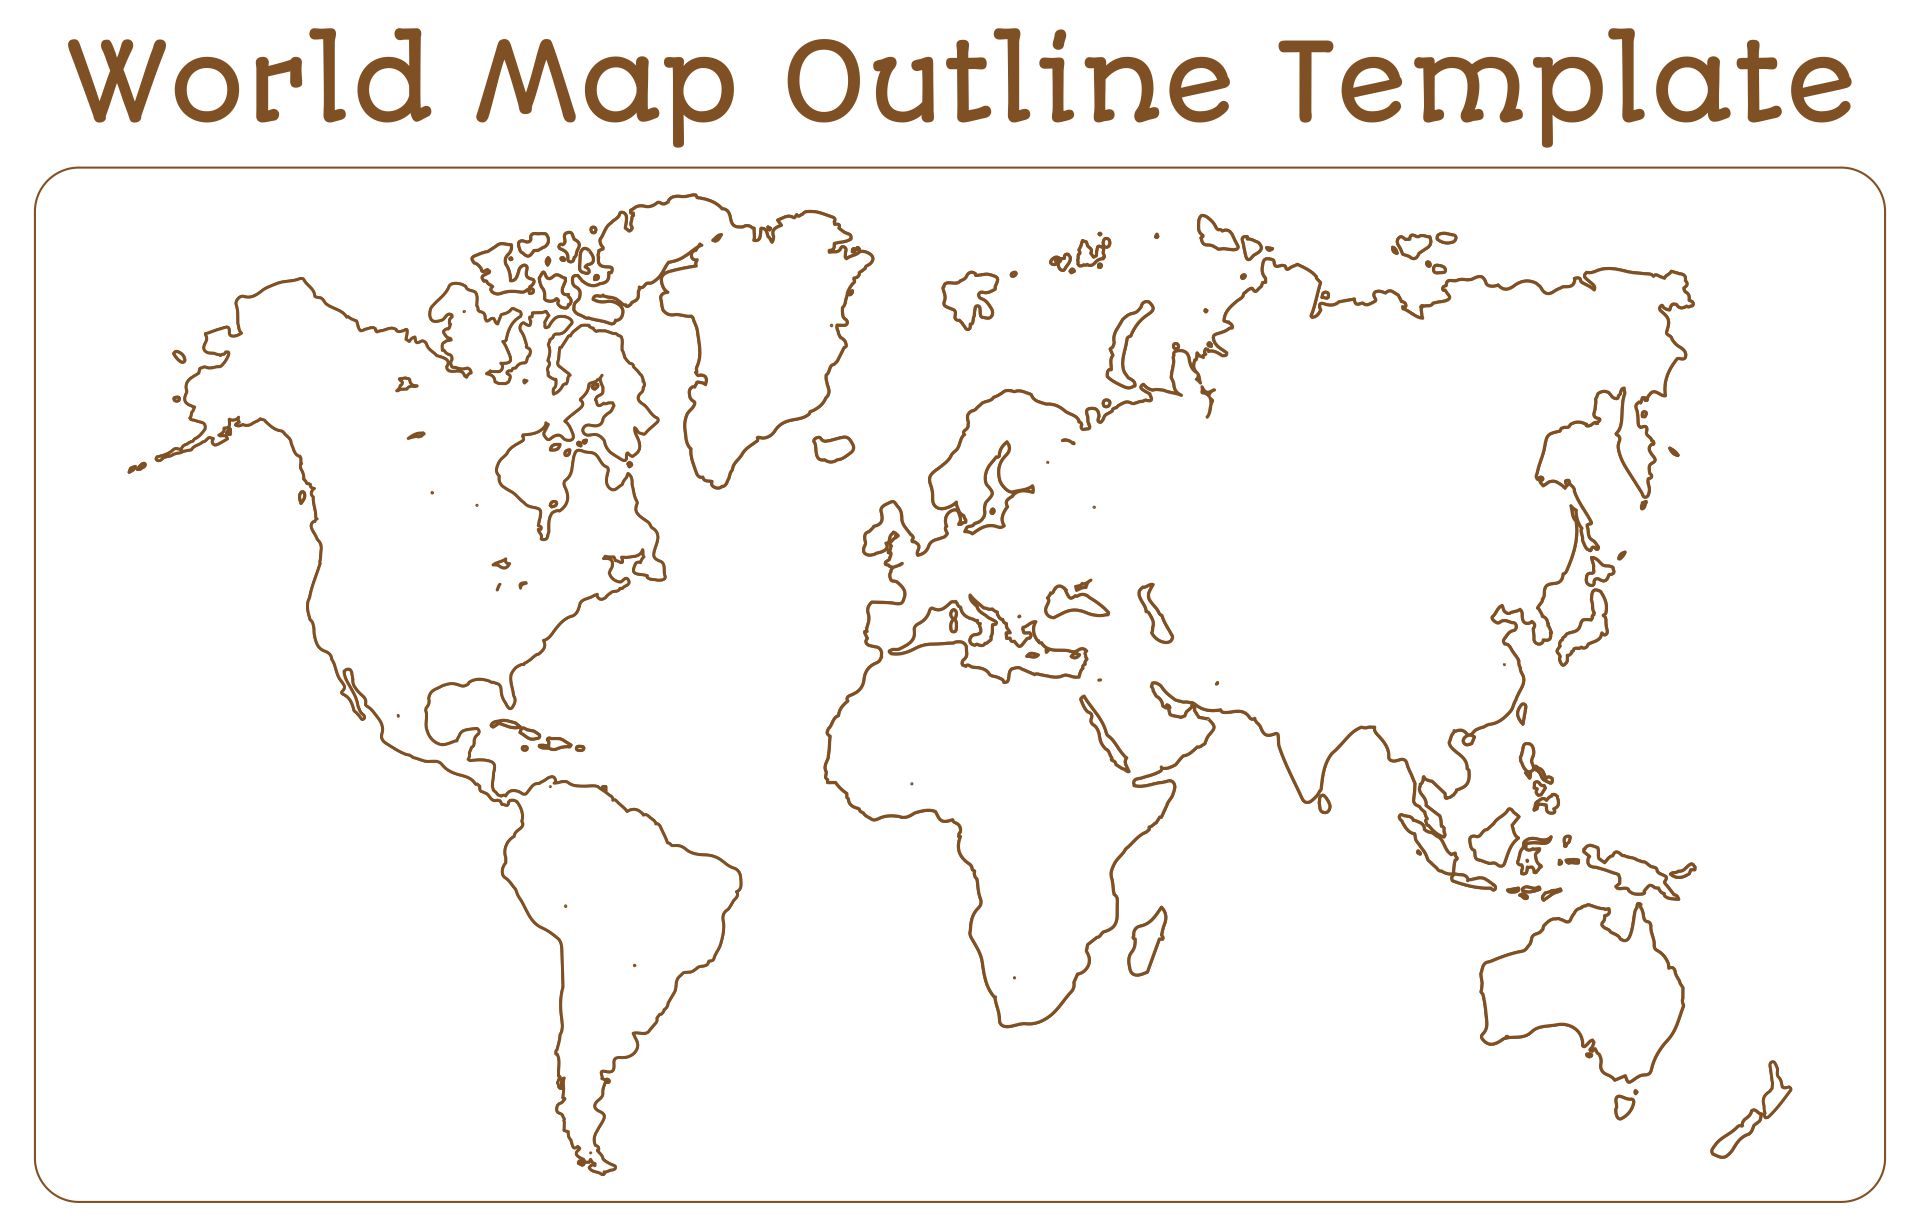 World Map Outline Template